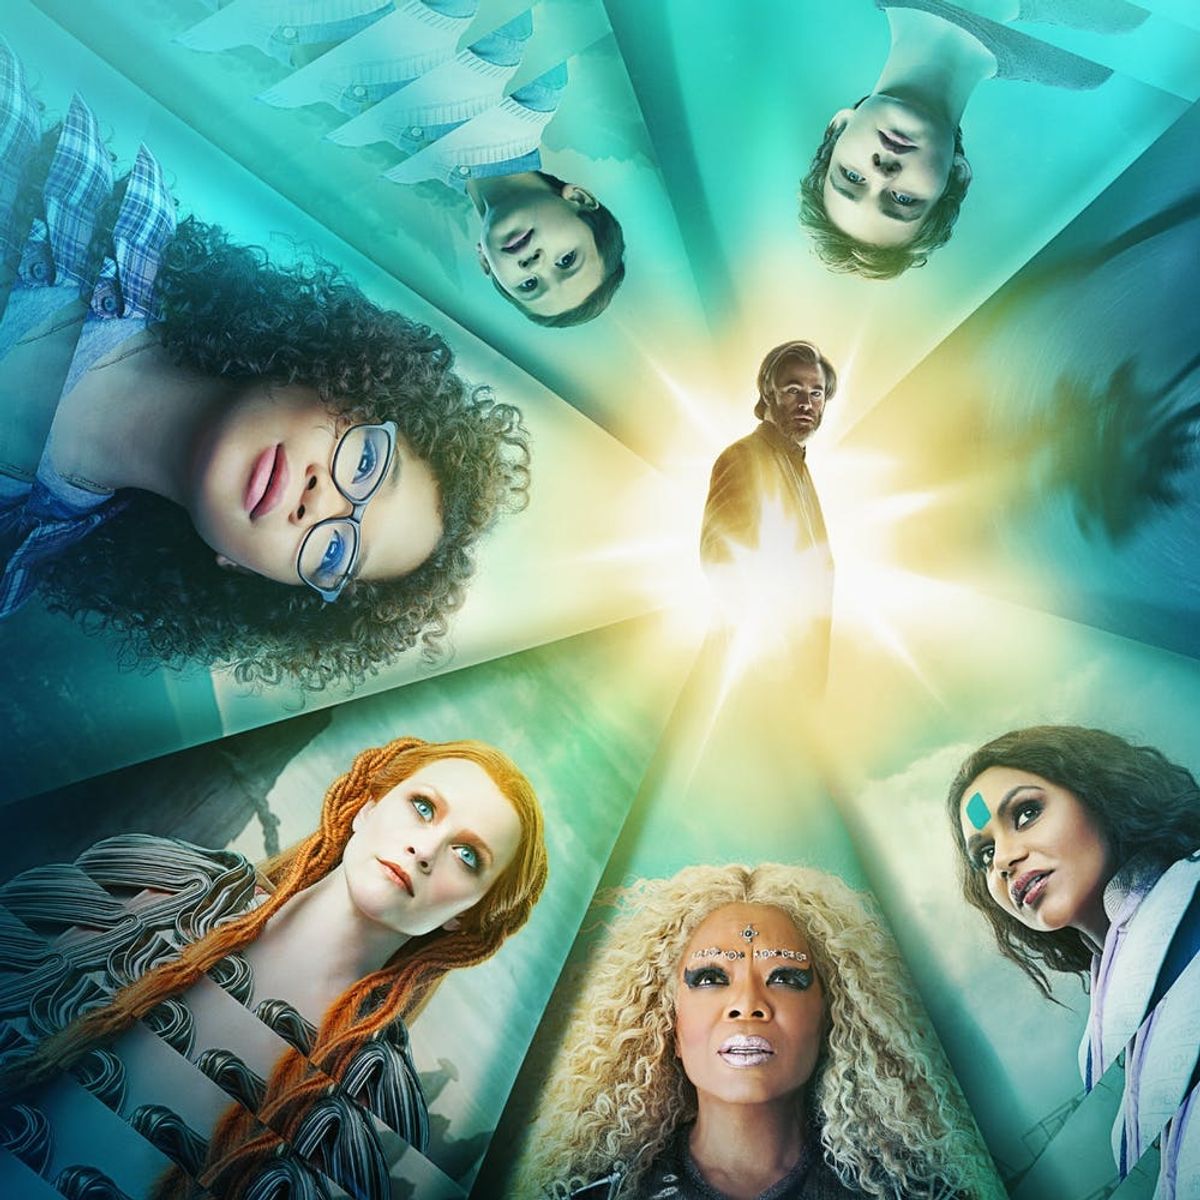 The New “A Wrinkle in Time” Teaser Trailer and Poster Are Out of This World